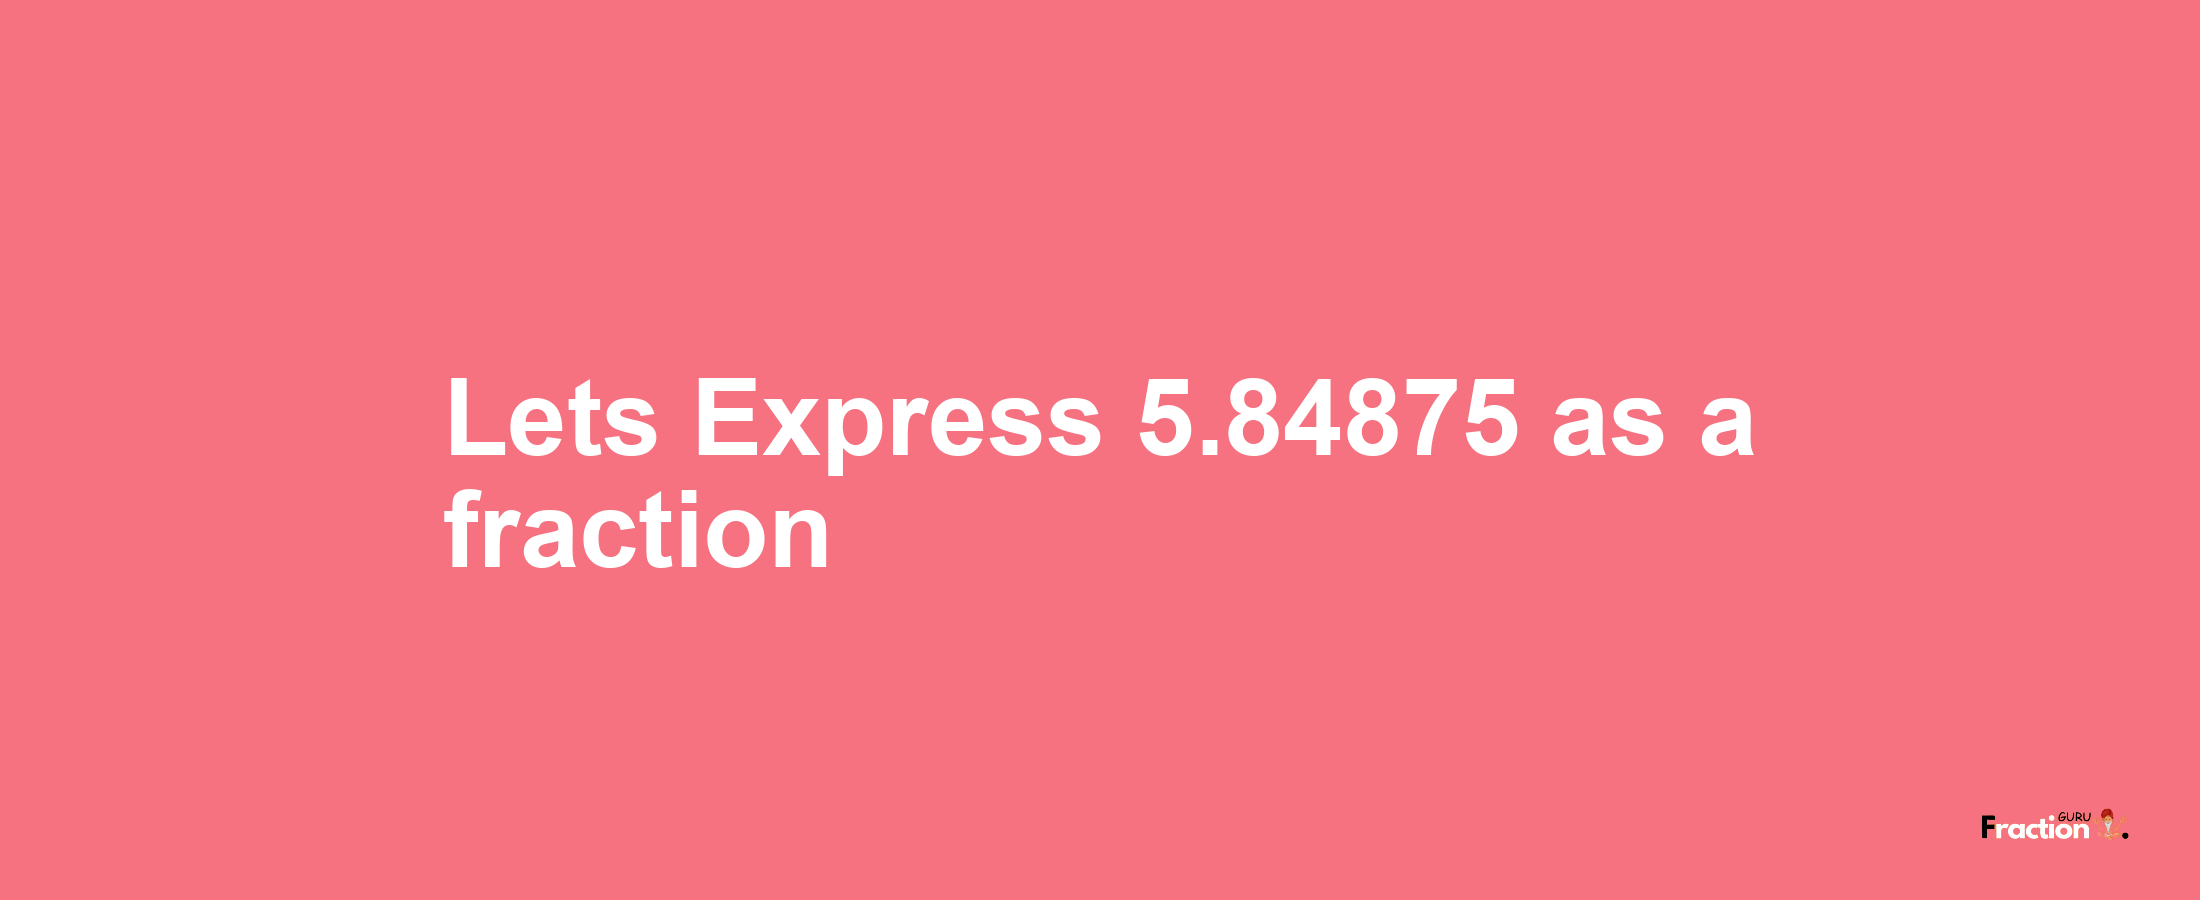 Lets Express 5.84875 as afraction